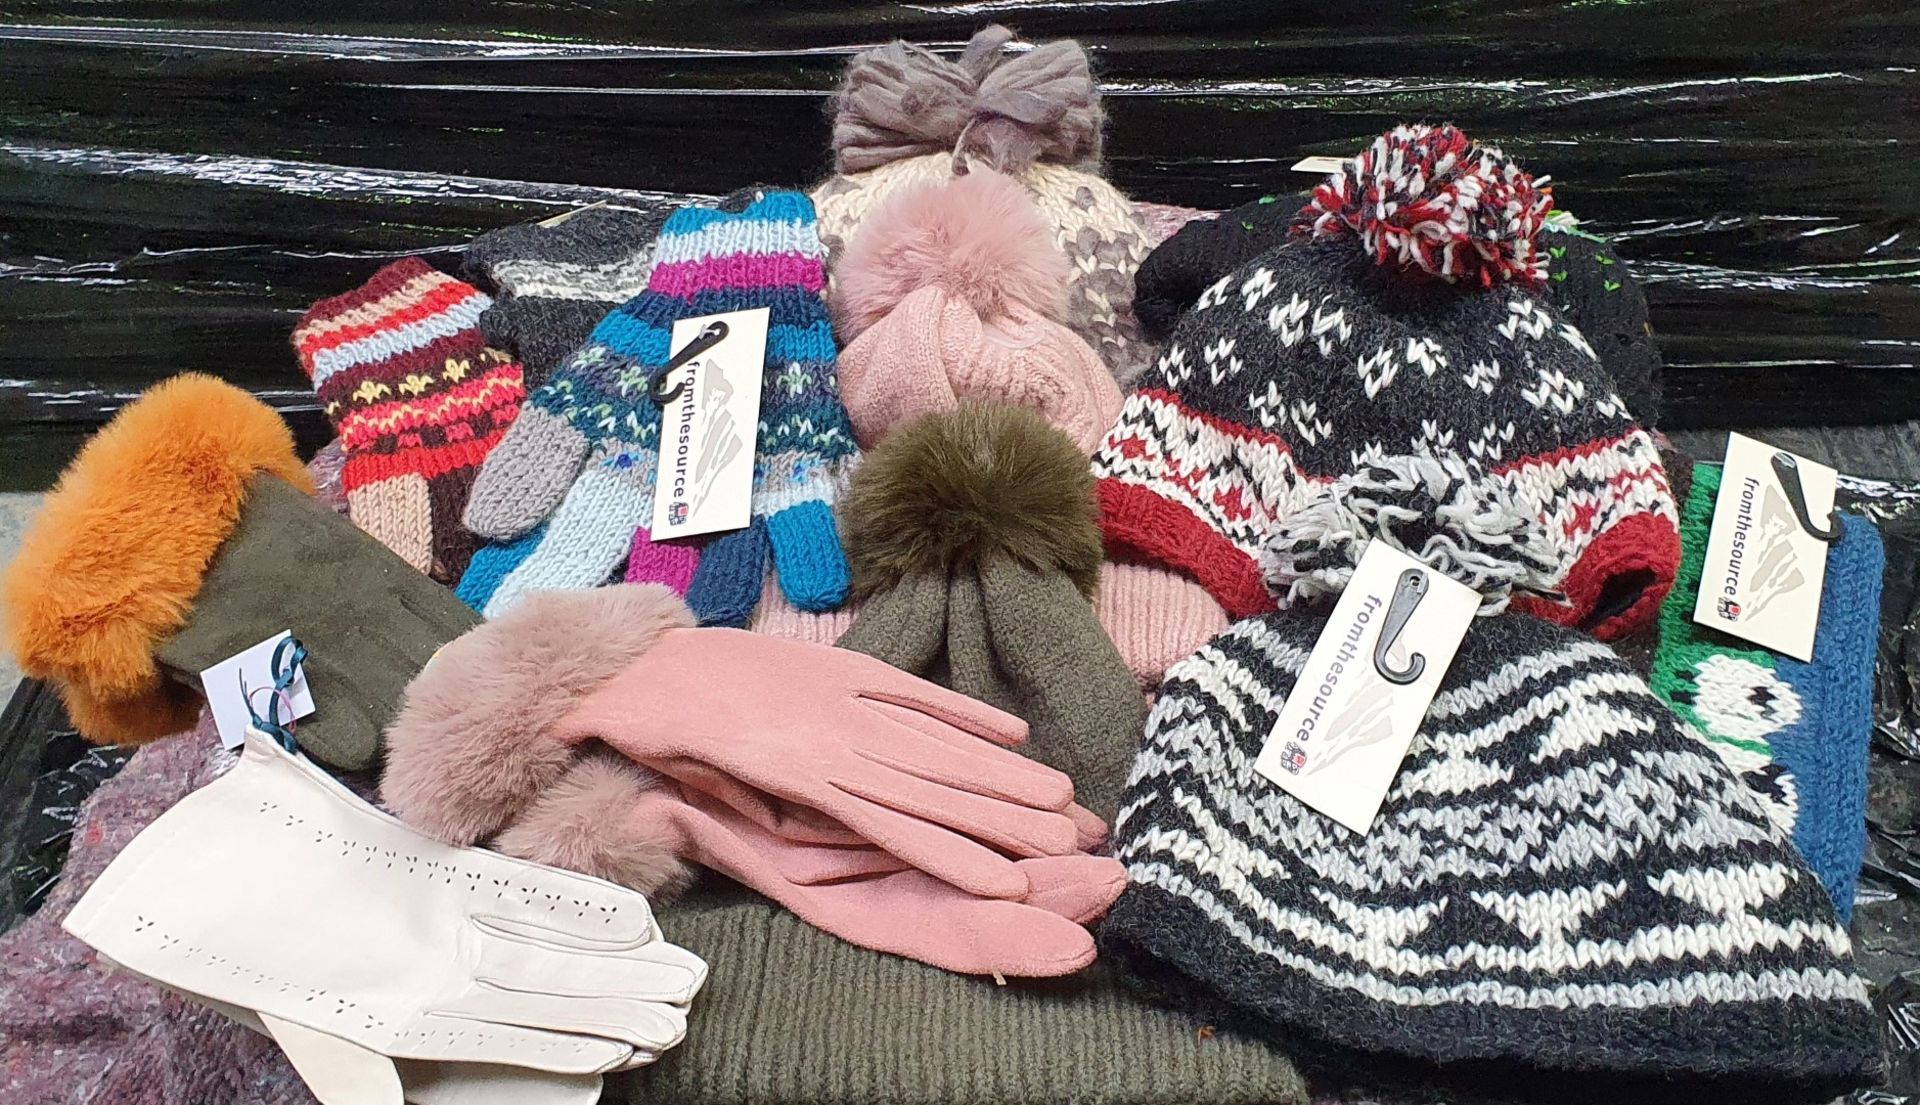 13 x Assorted Bobble Hats and Woolly Gloves by From The Source - New Stock - Ref: TCH236 - CL840 -